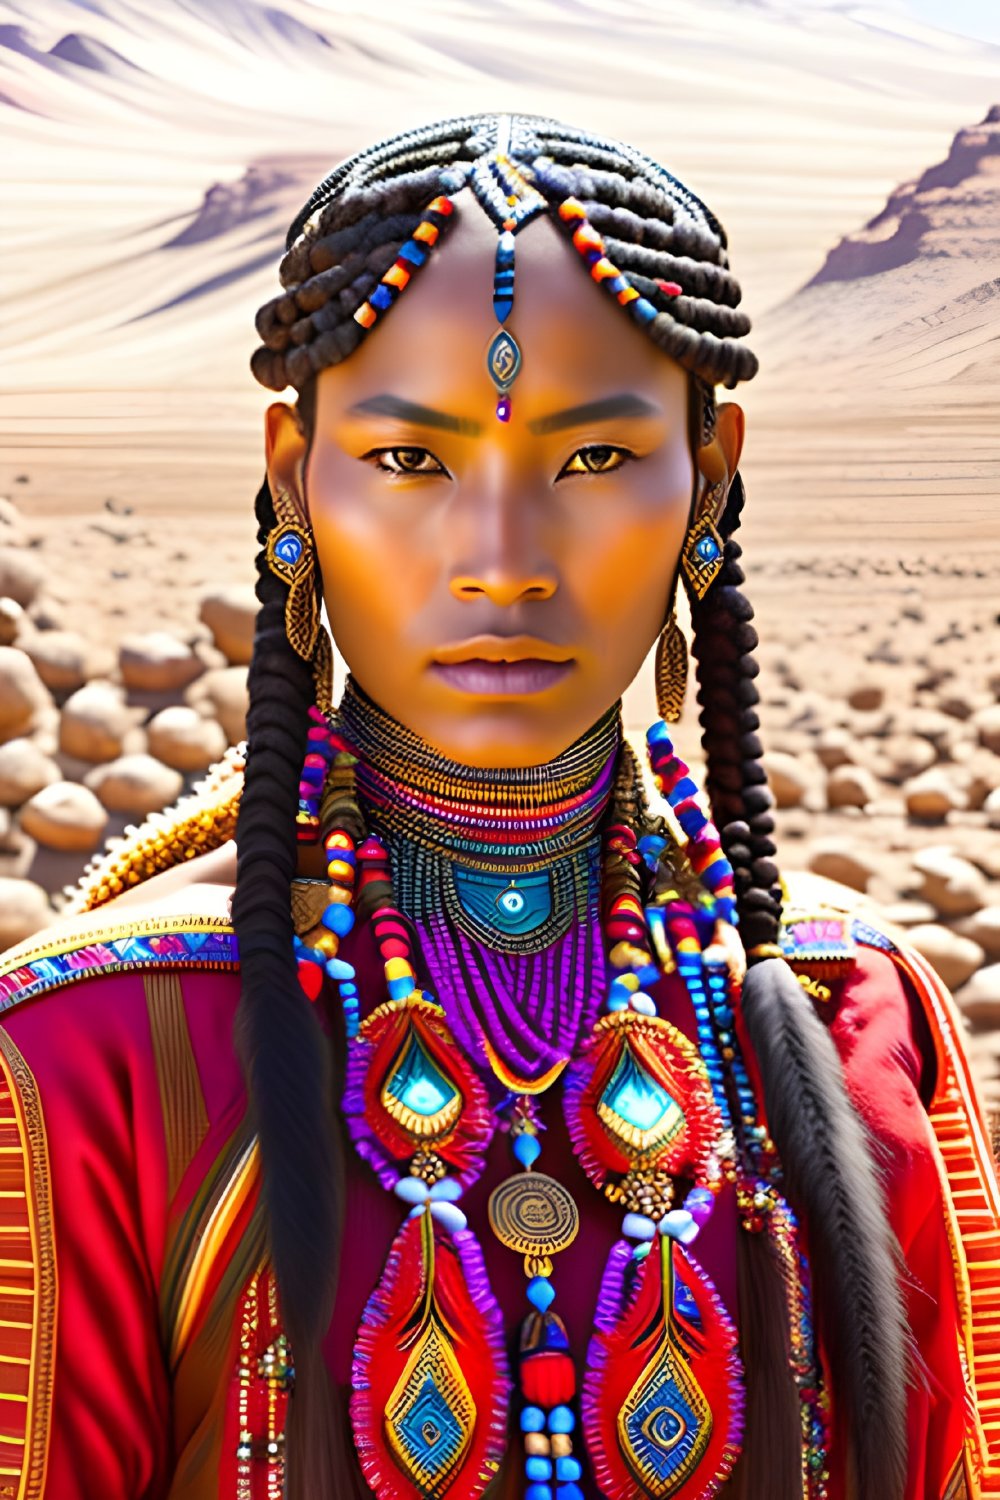 Traditional Attire with Intricate Beadwork in Desert Scene